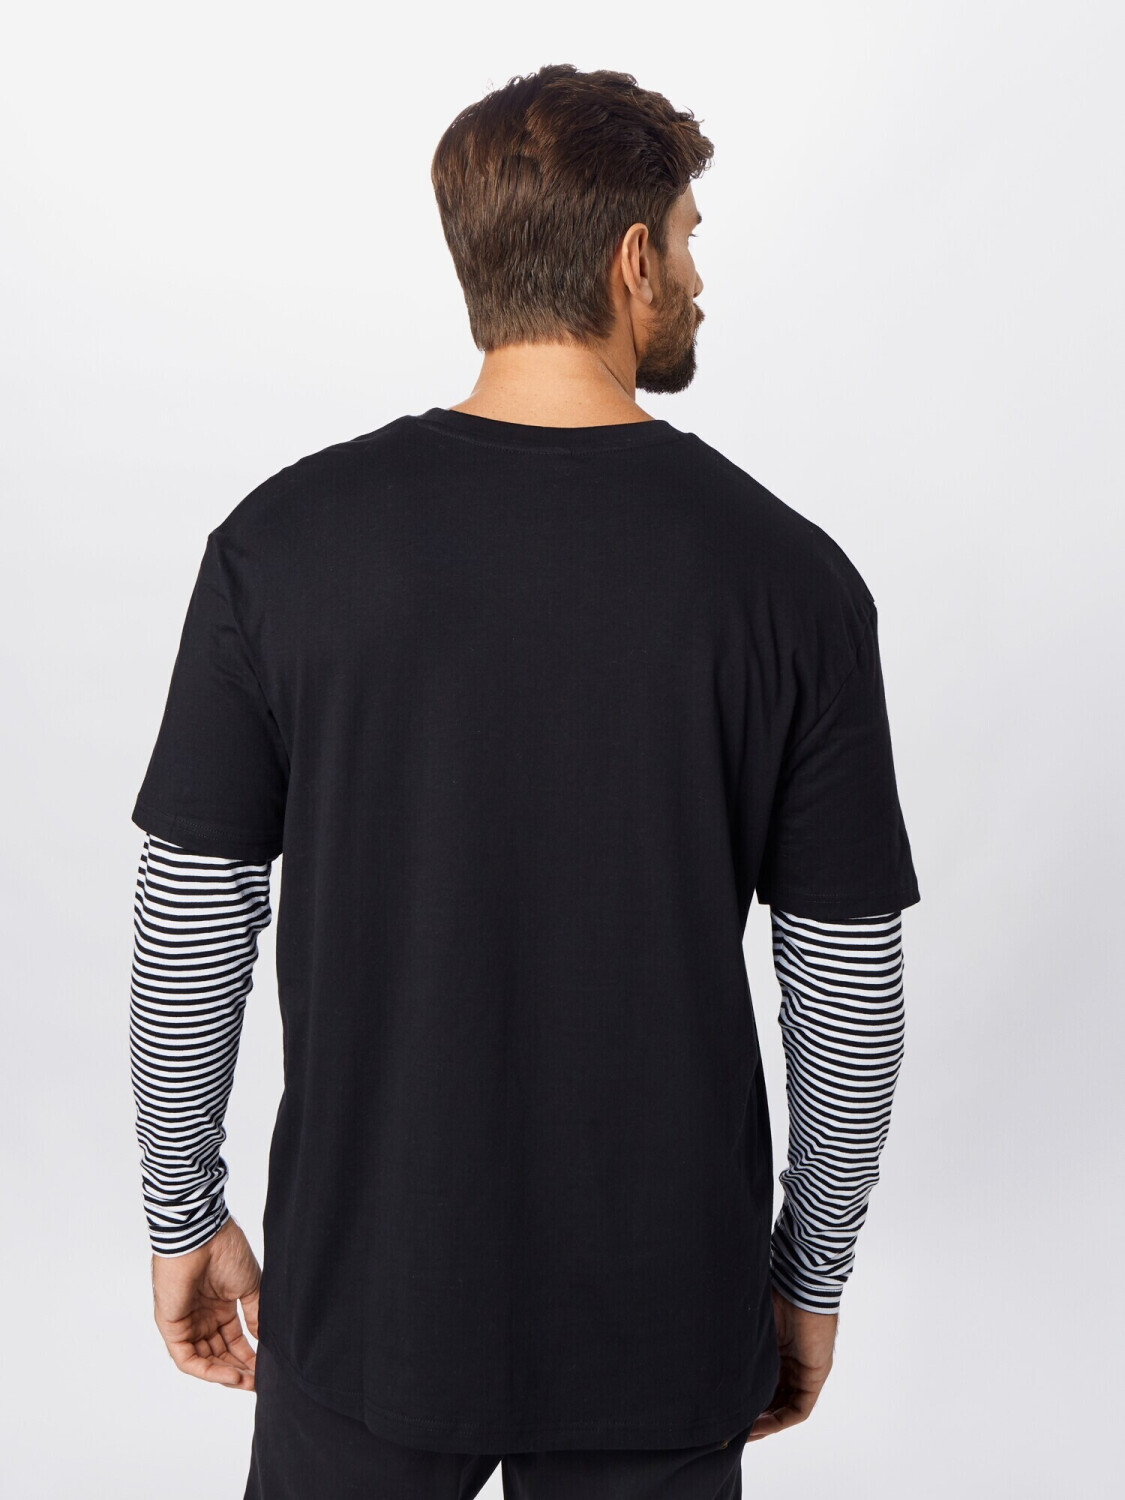 Buy Urban Classics – Striped Double Tee Oversized (Today) (TB3498) on from £11.99 black Best Layer LS Deals